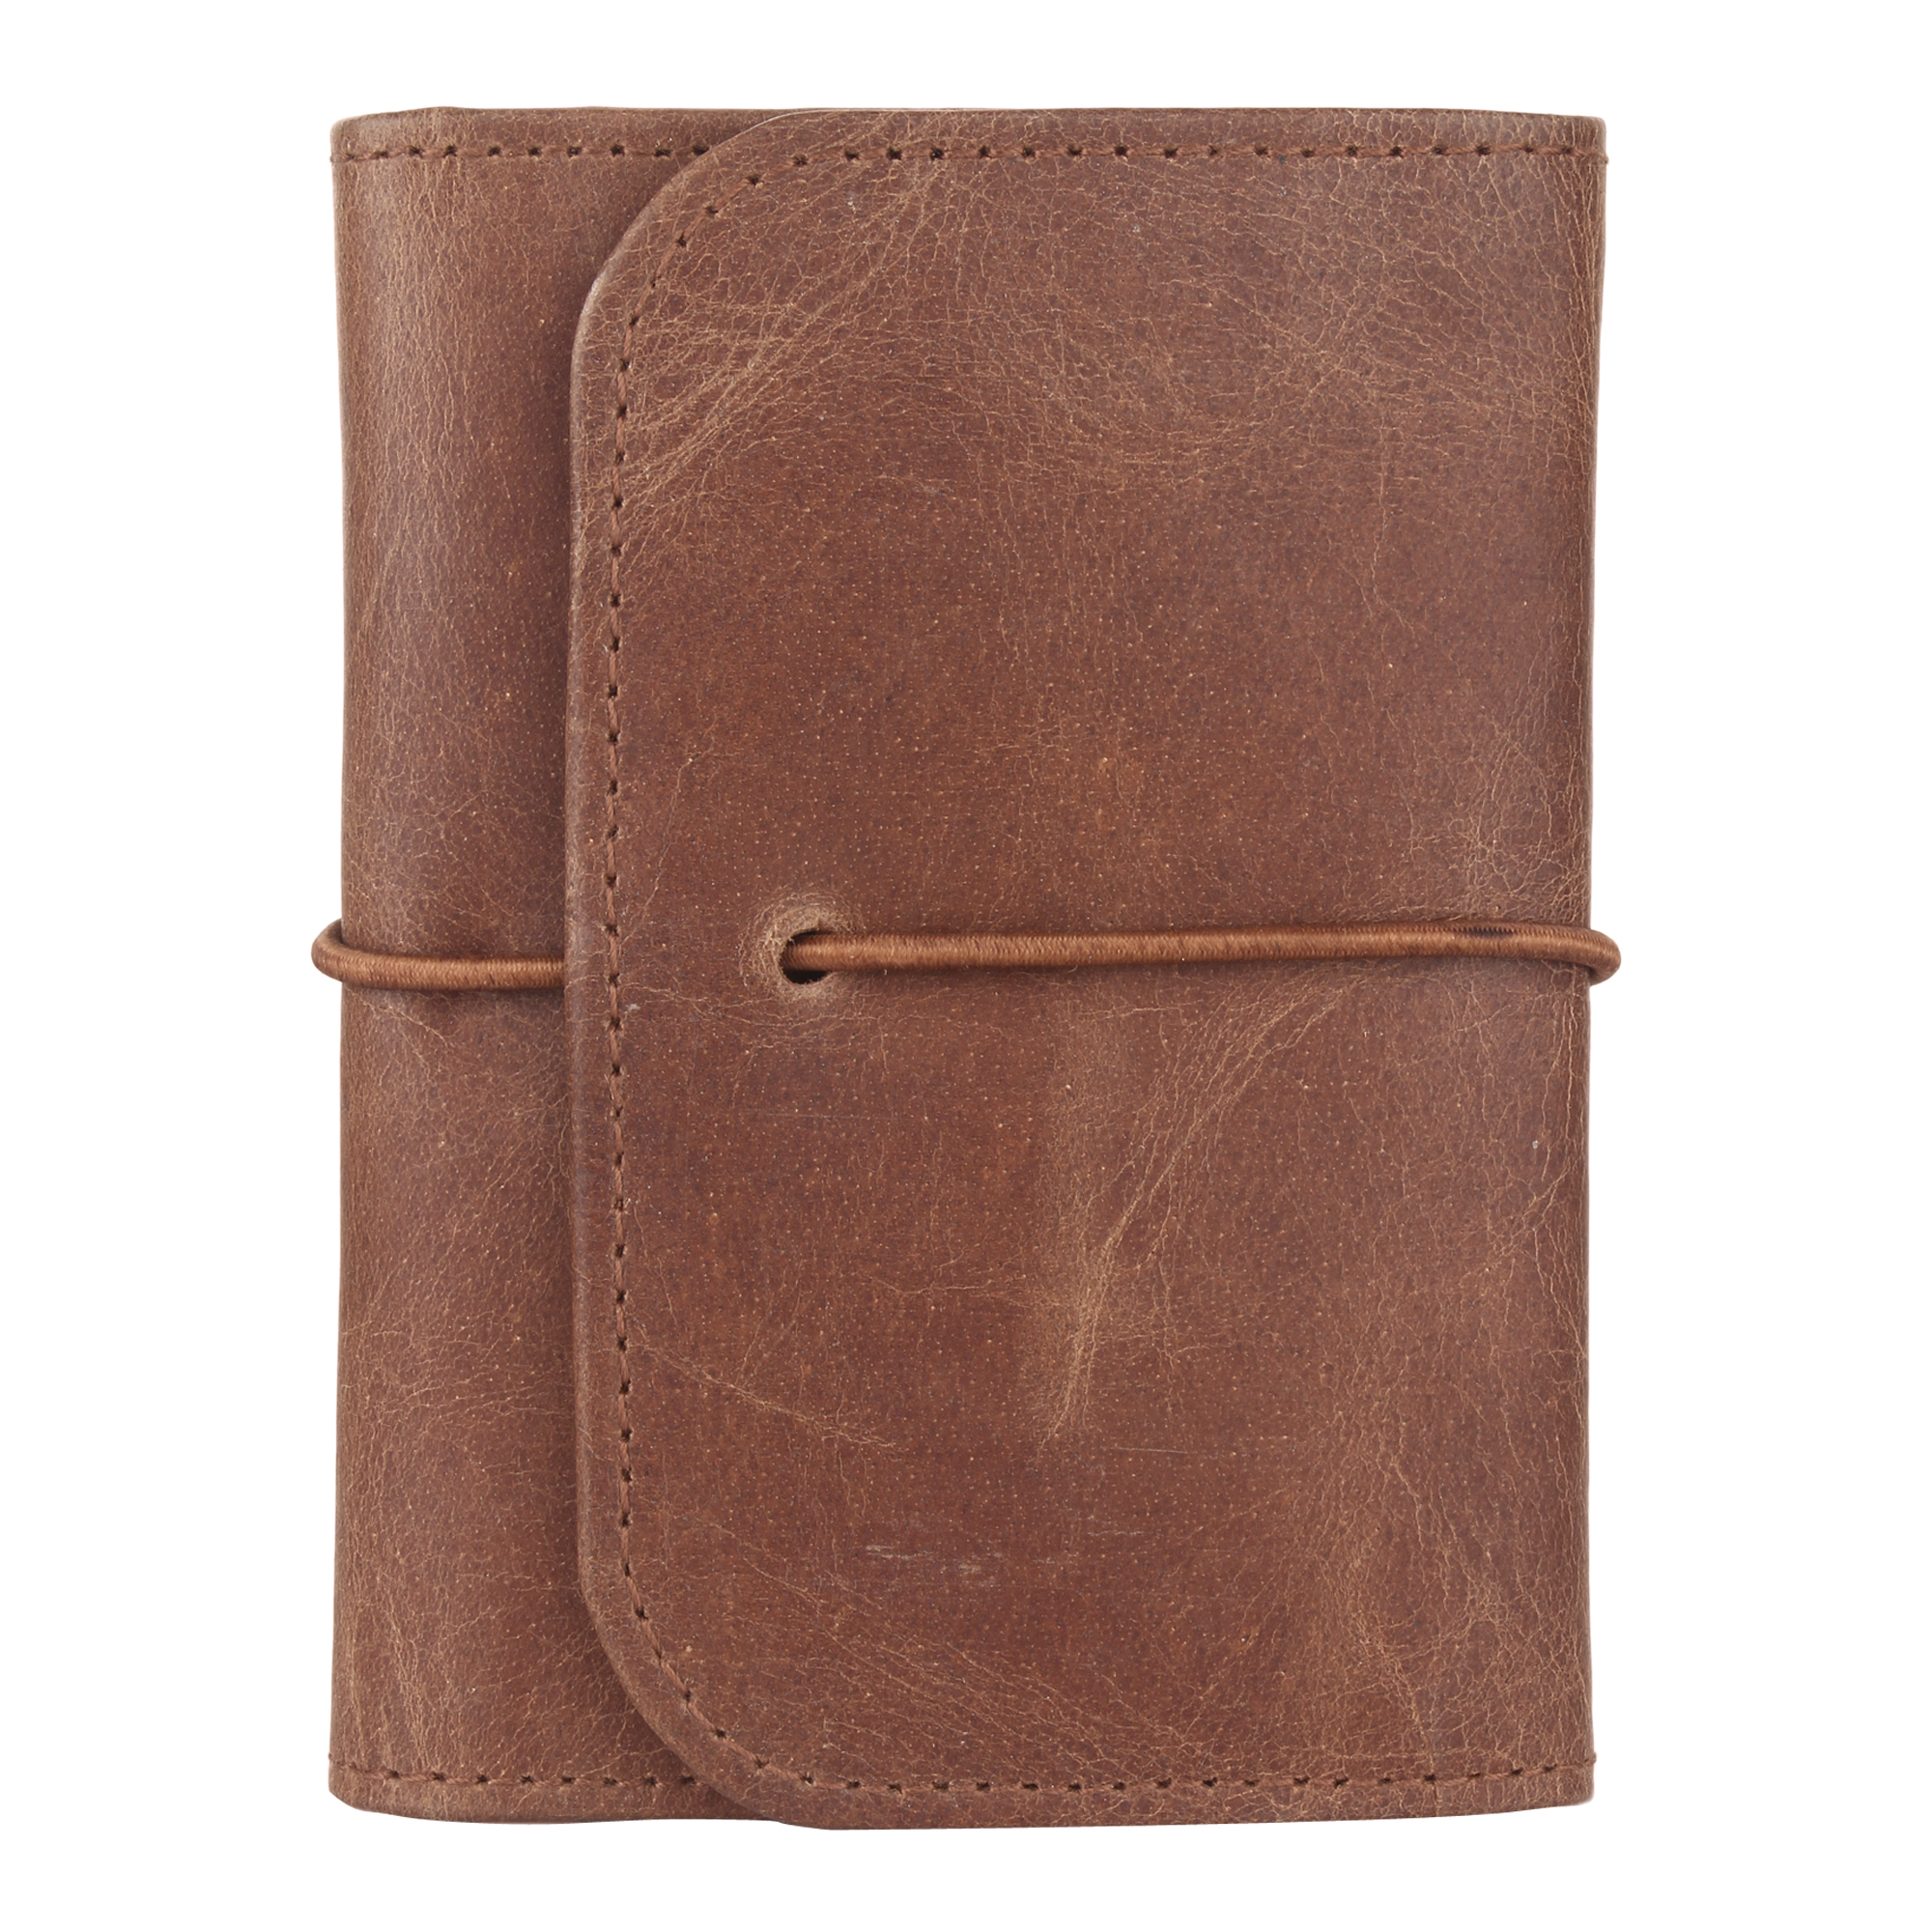 Leather Card Holder Wallet Manufacturers In Mexico, Card Holder Wallet Suppliers In Mexico, Card Holder Wallet Wholesalers In Mexico, Card Holder Wallet Traders In Mexico 